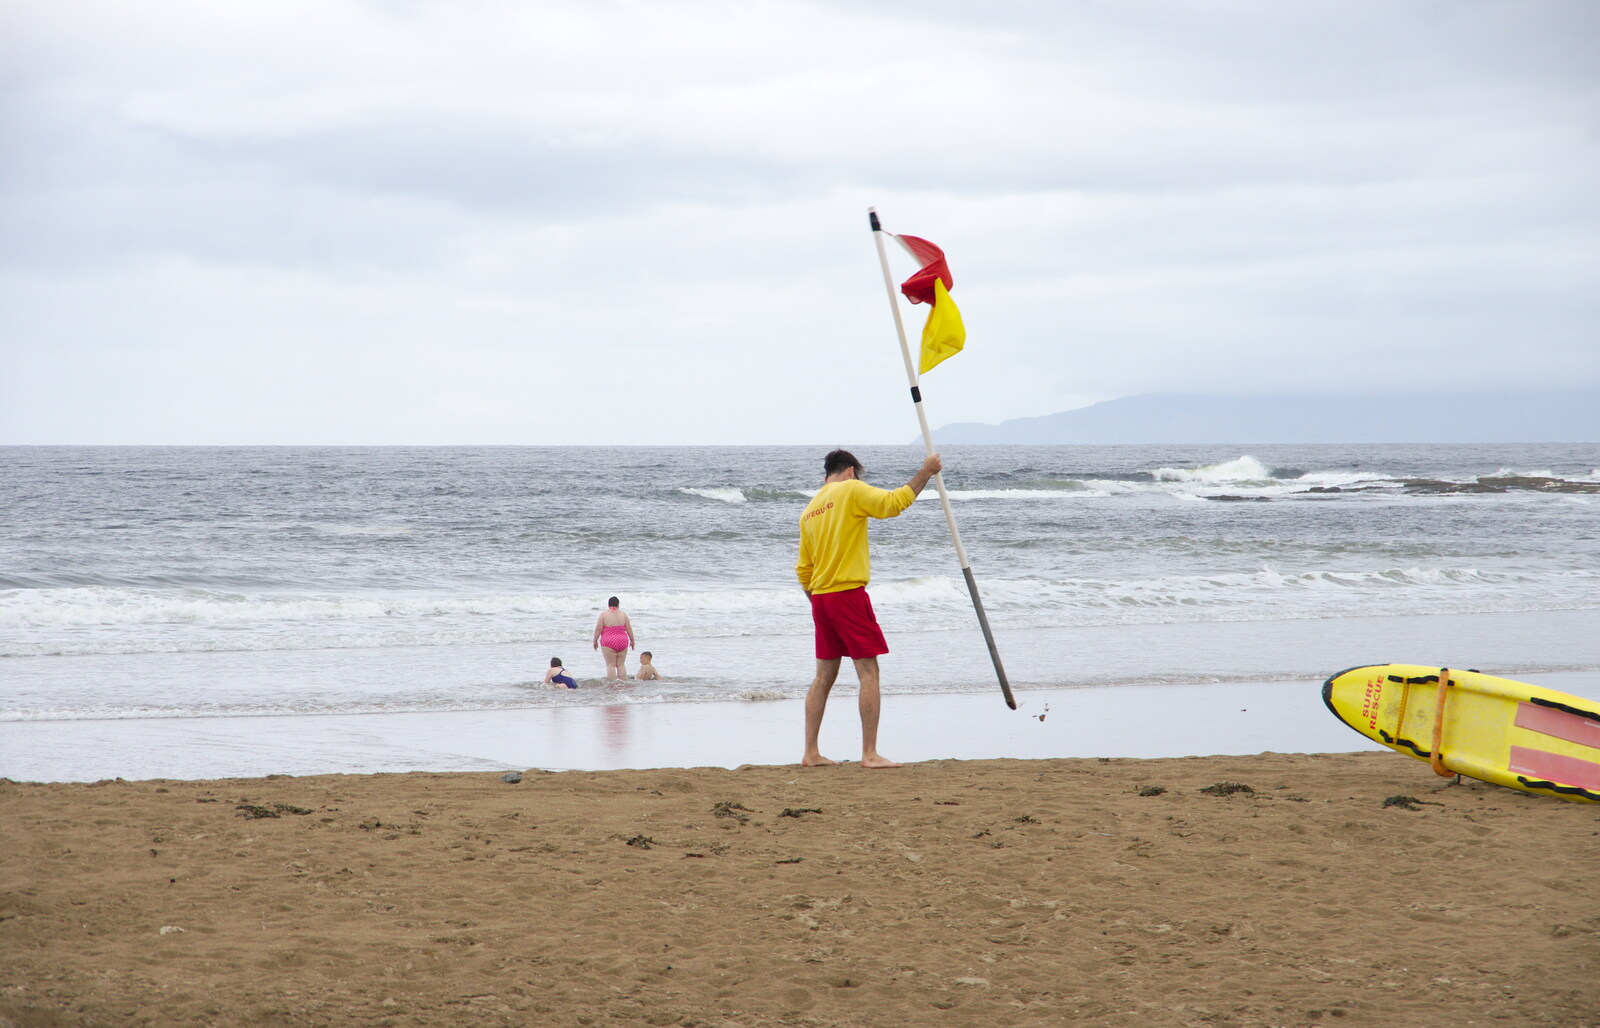 The lifeguard plants a flag from A Day in Derry, County Londonderry, Northern Ireland - 15th August 2019